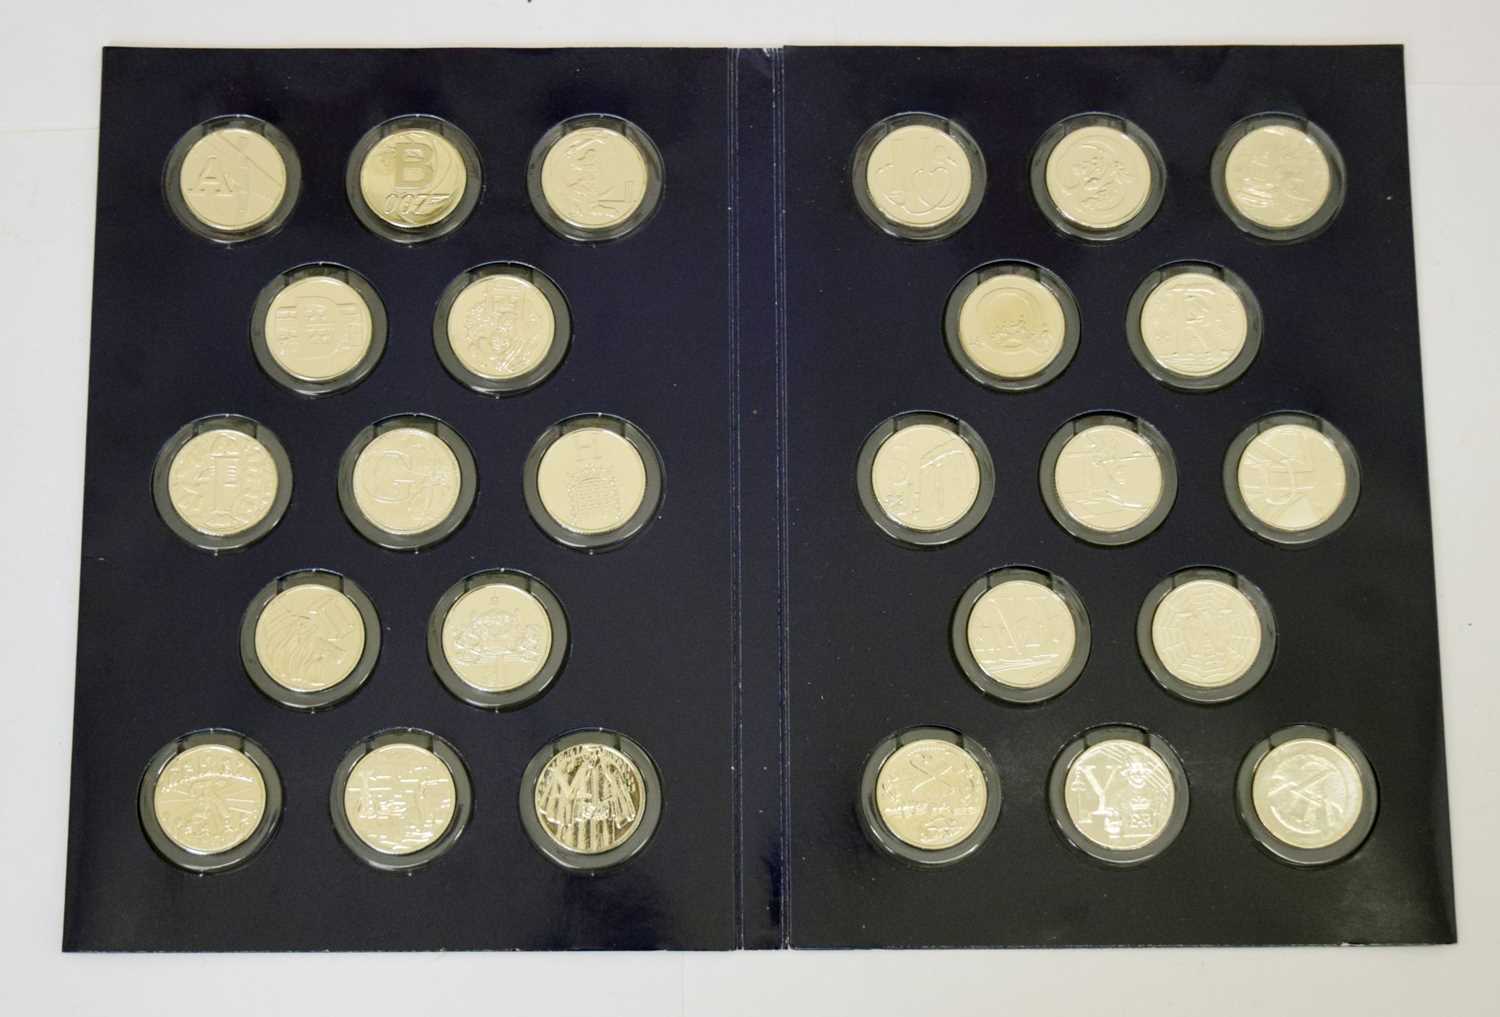 Royal Mint complete set of A-Z of Great Britain 10p coins, 2018